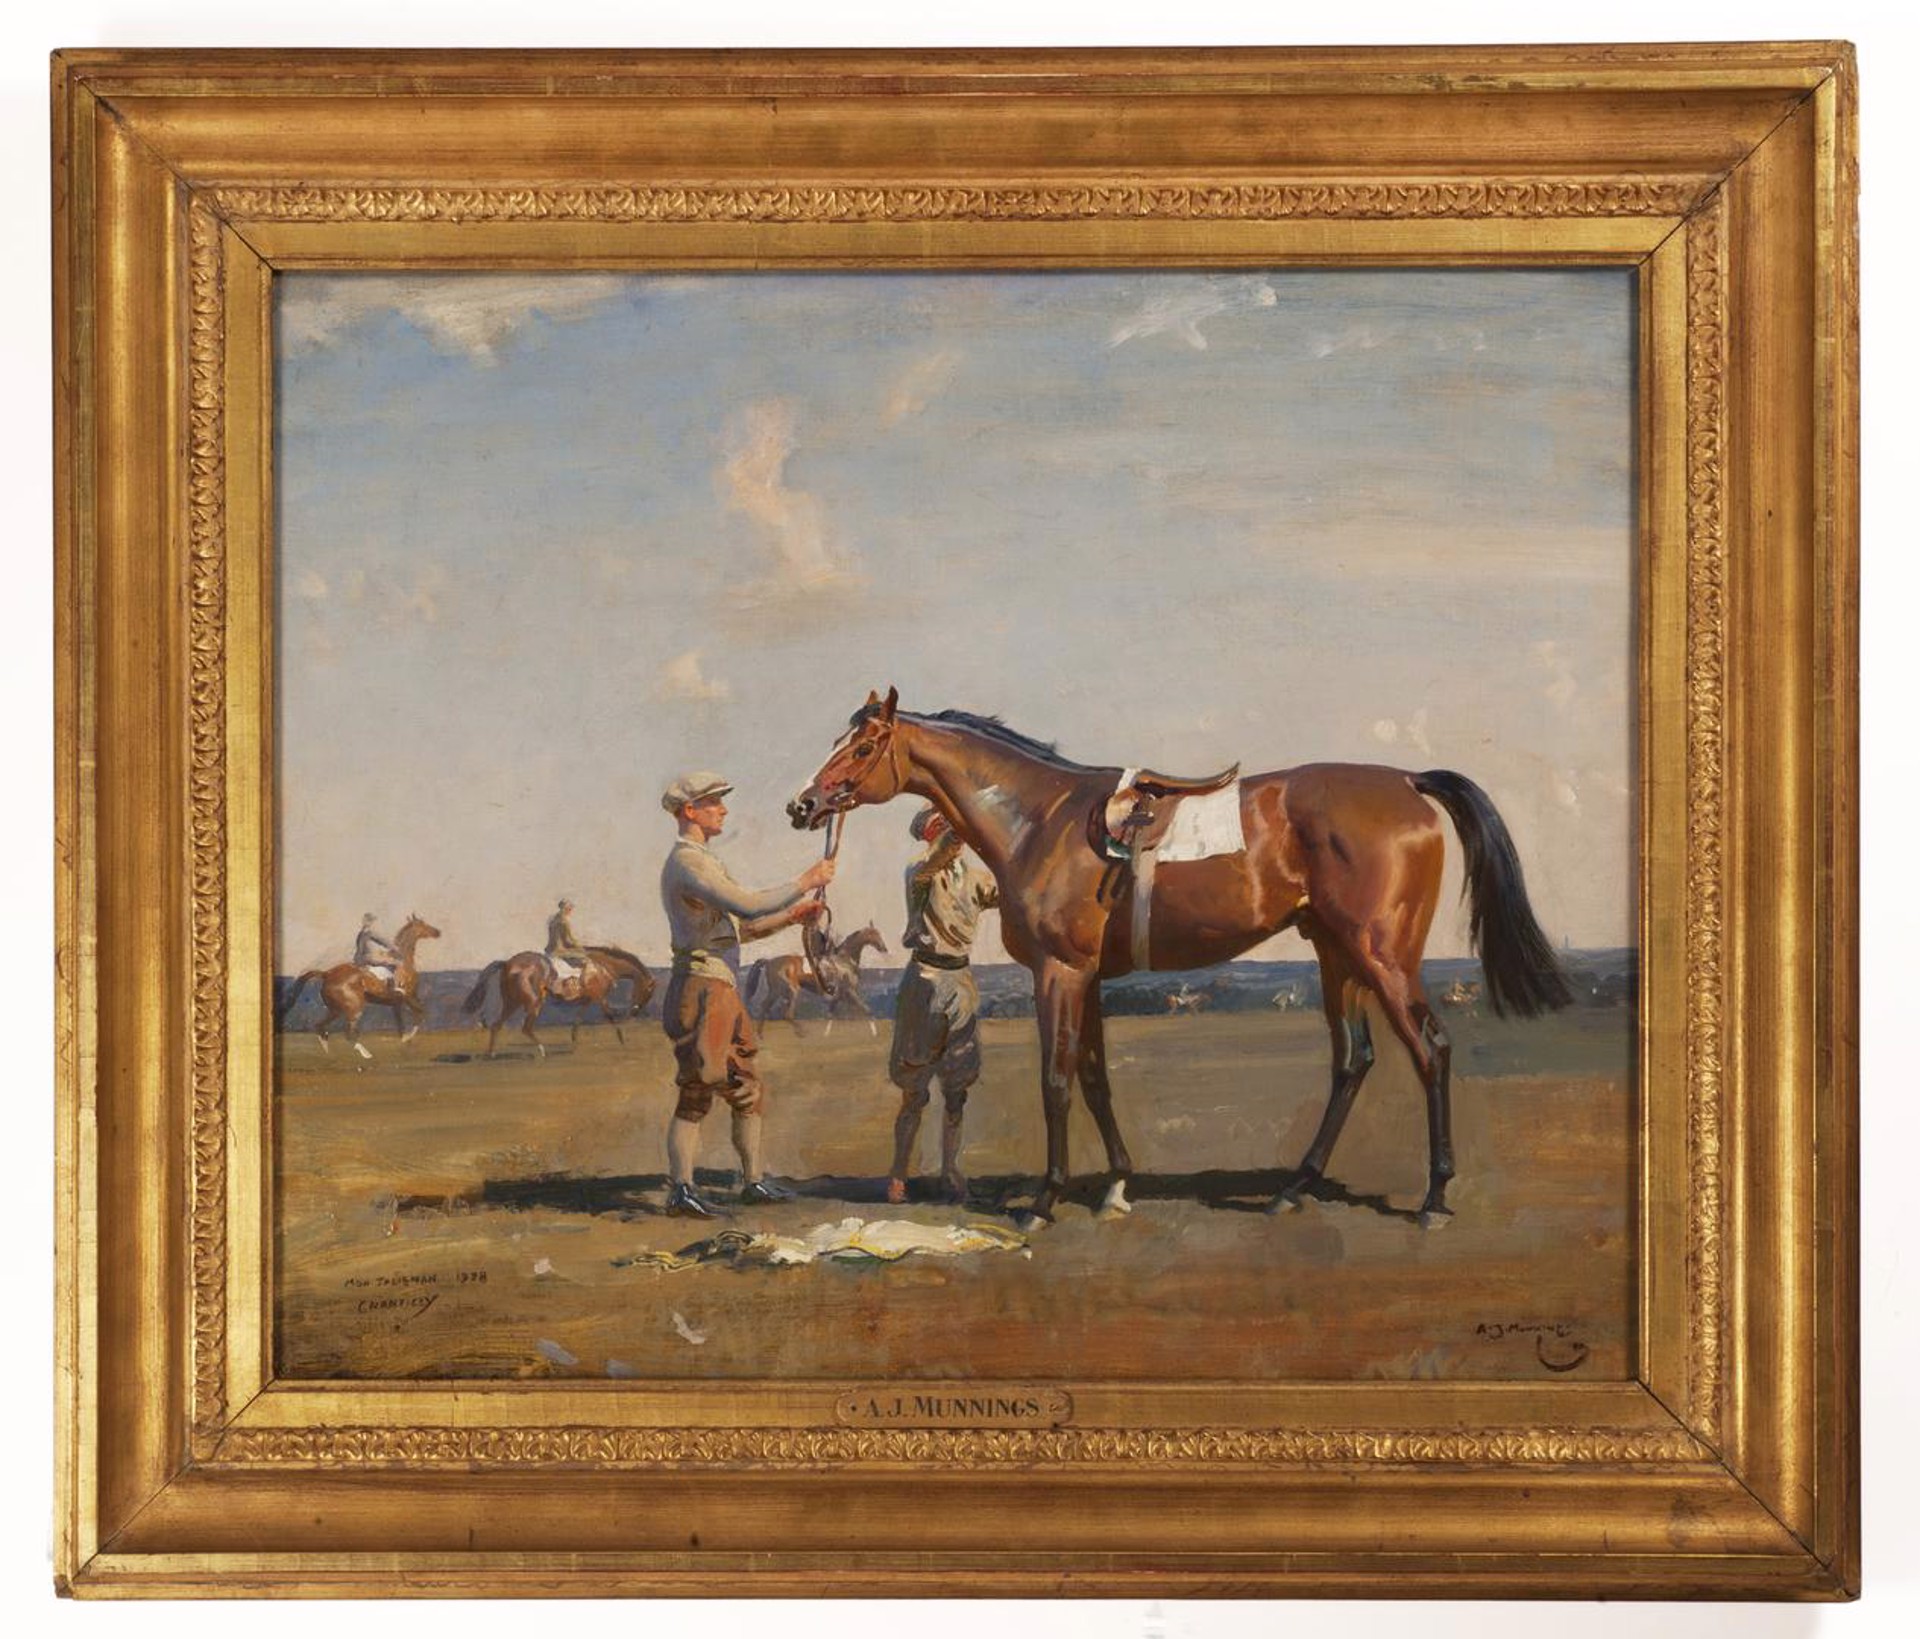 Mon Talisman after Breezing at Chantilly by Sir Alfred J. Munnings